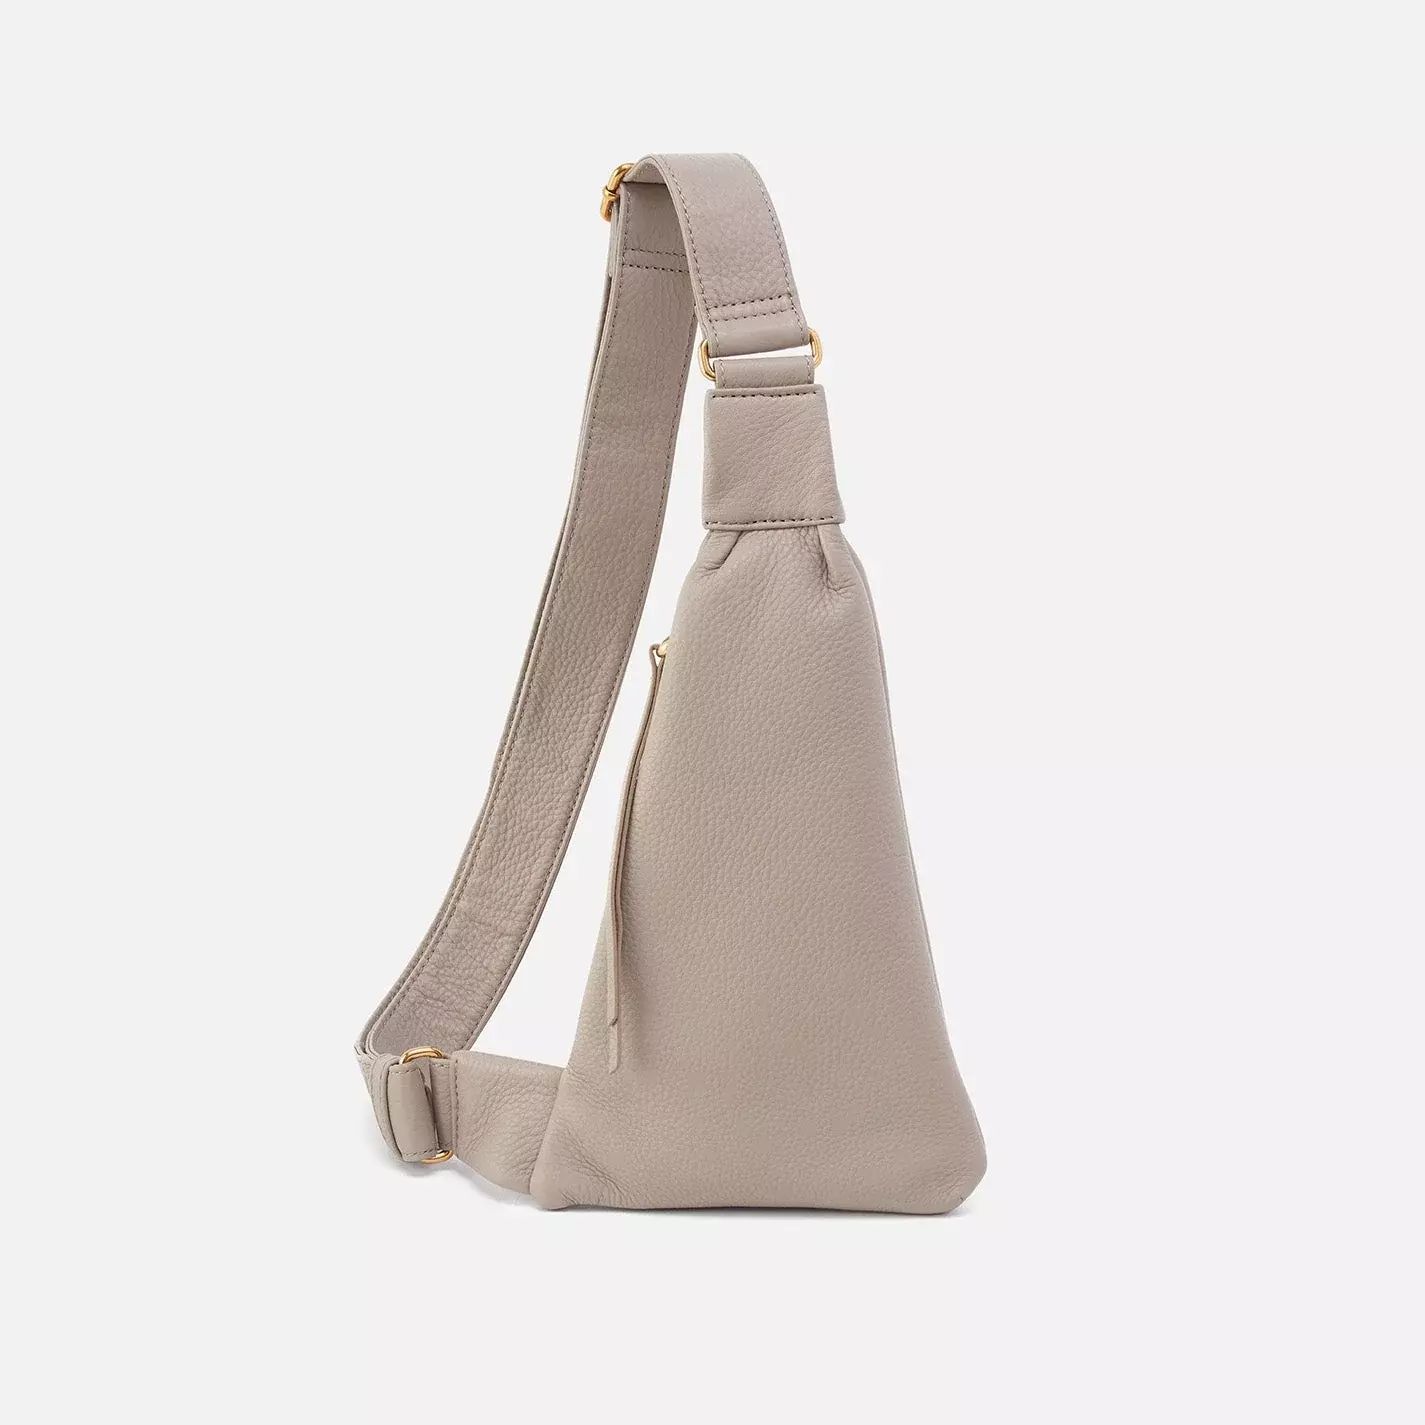 Bodhi Sling in Pebbled Leather - Taupe | HOBO Bags